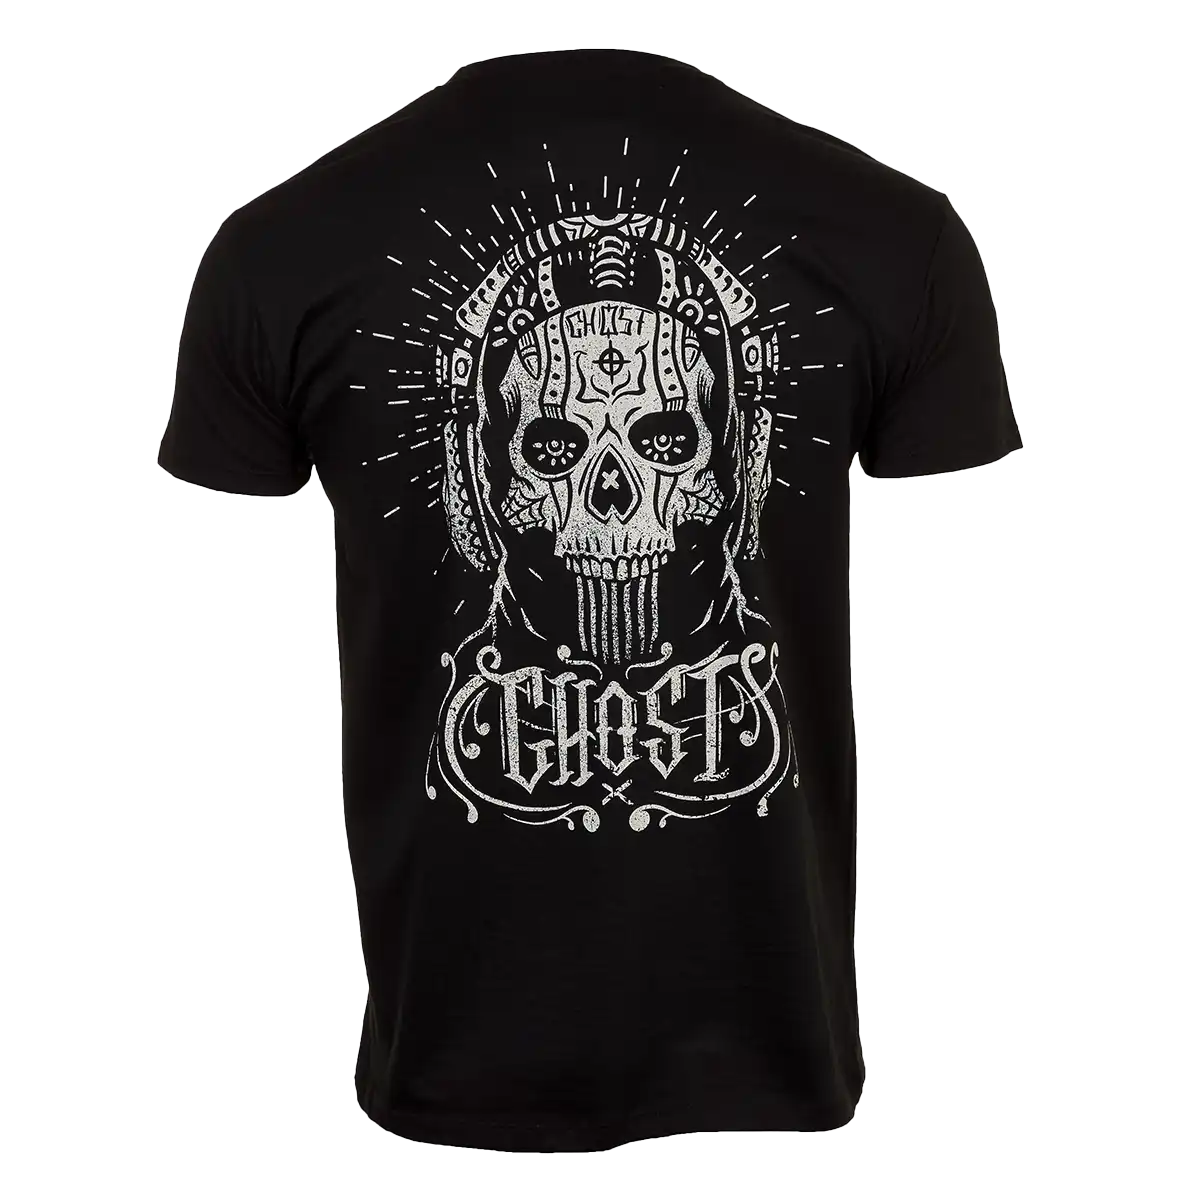 Call of Duty T-Shirt "Ghost" Black XL Image 2